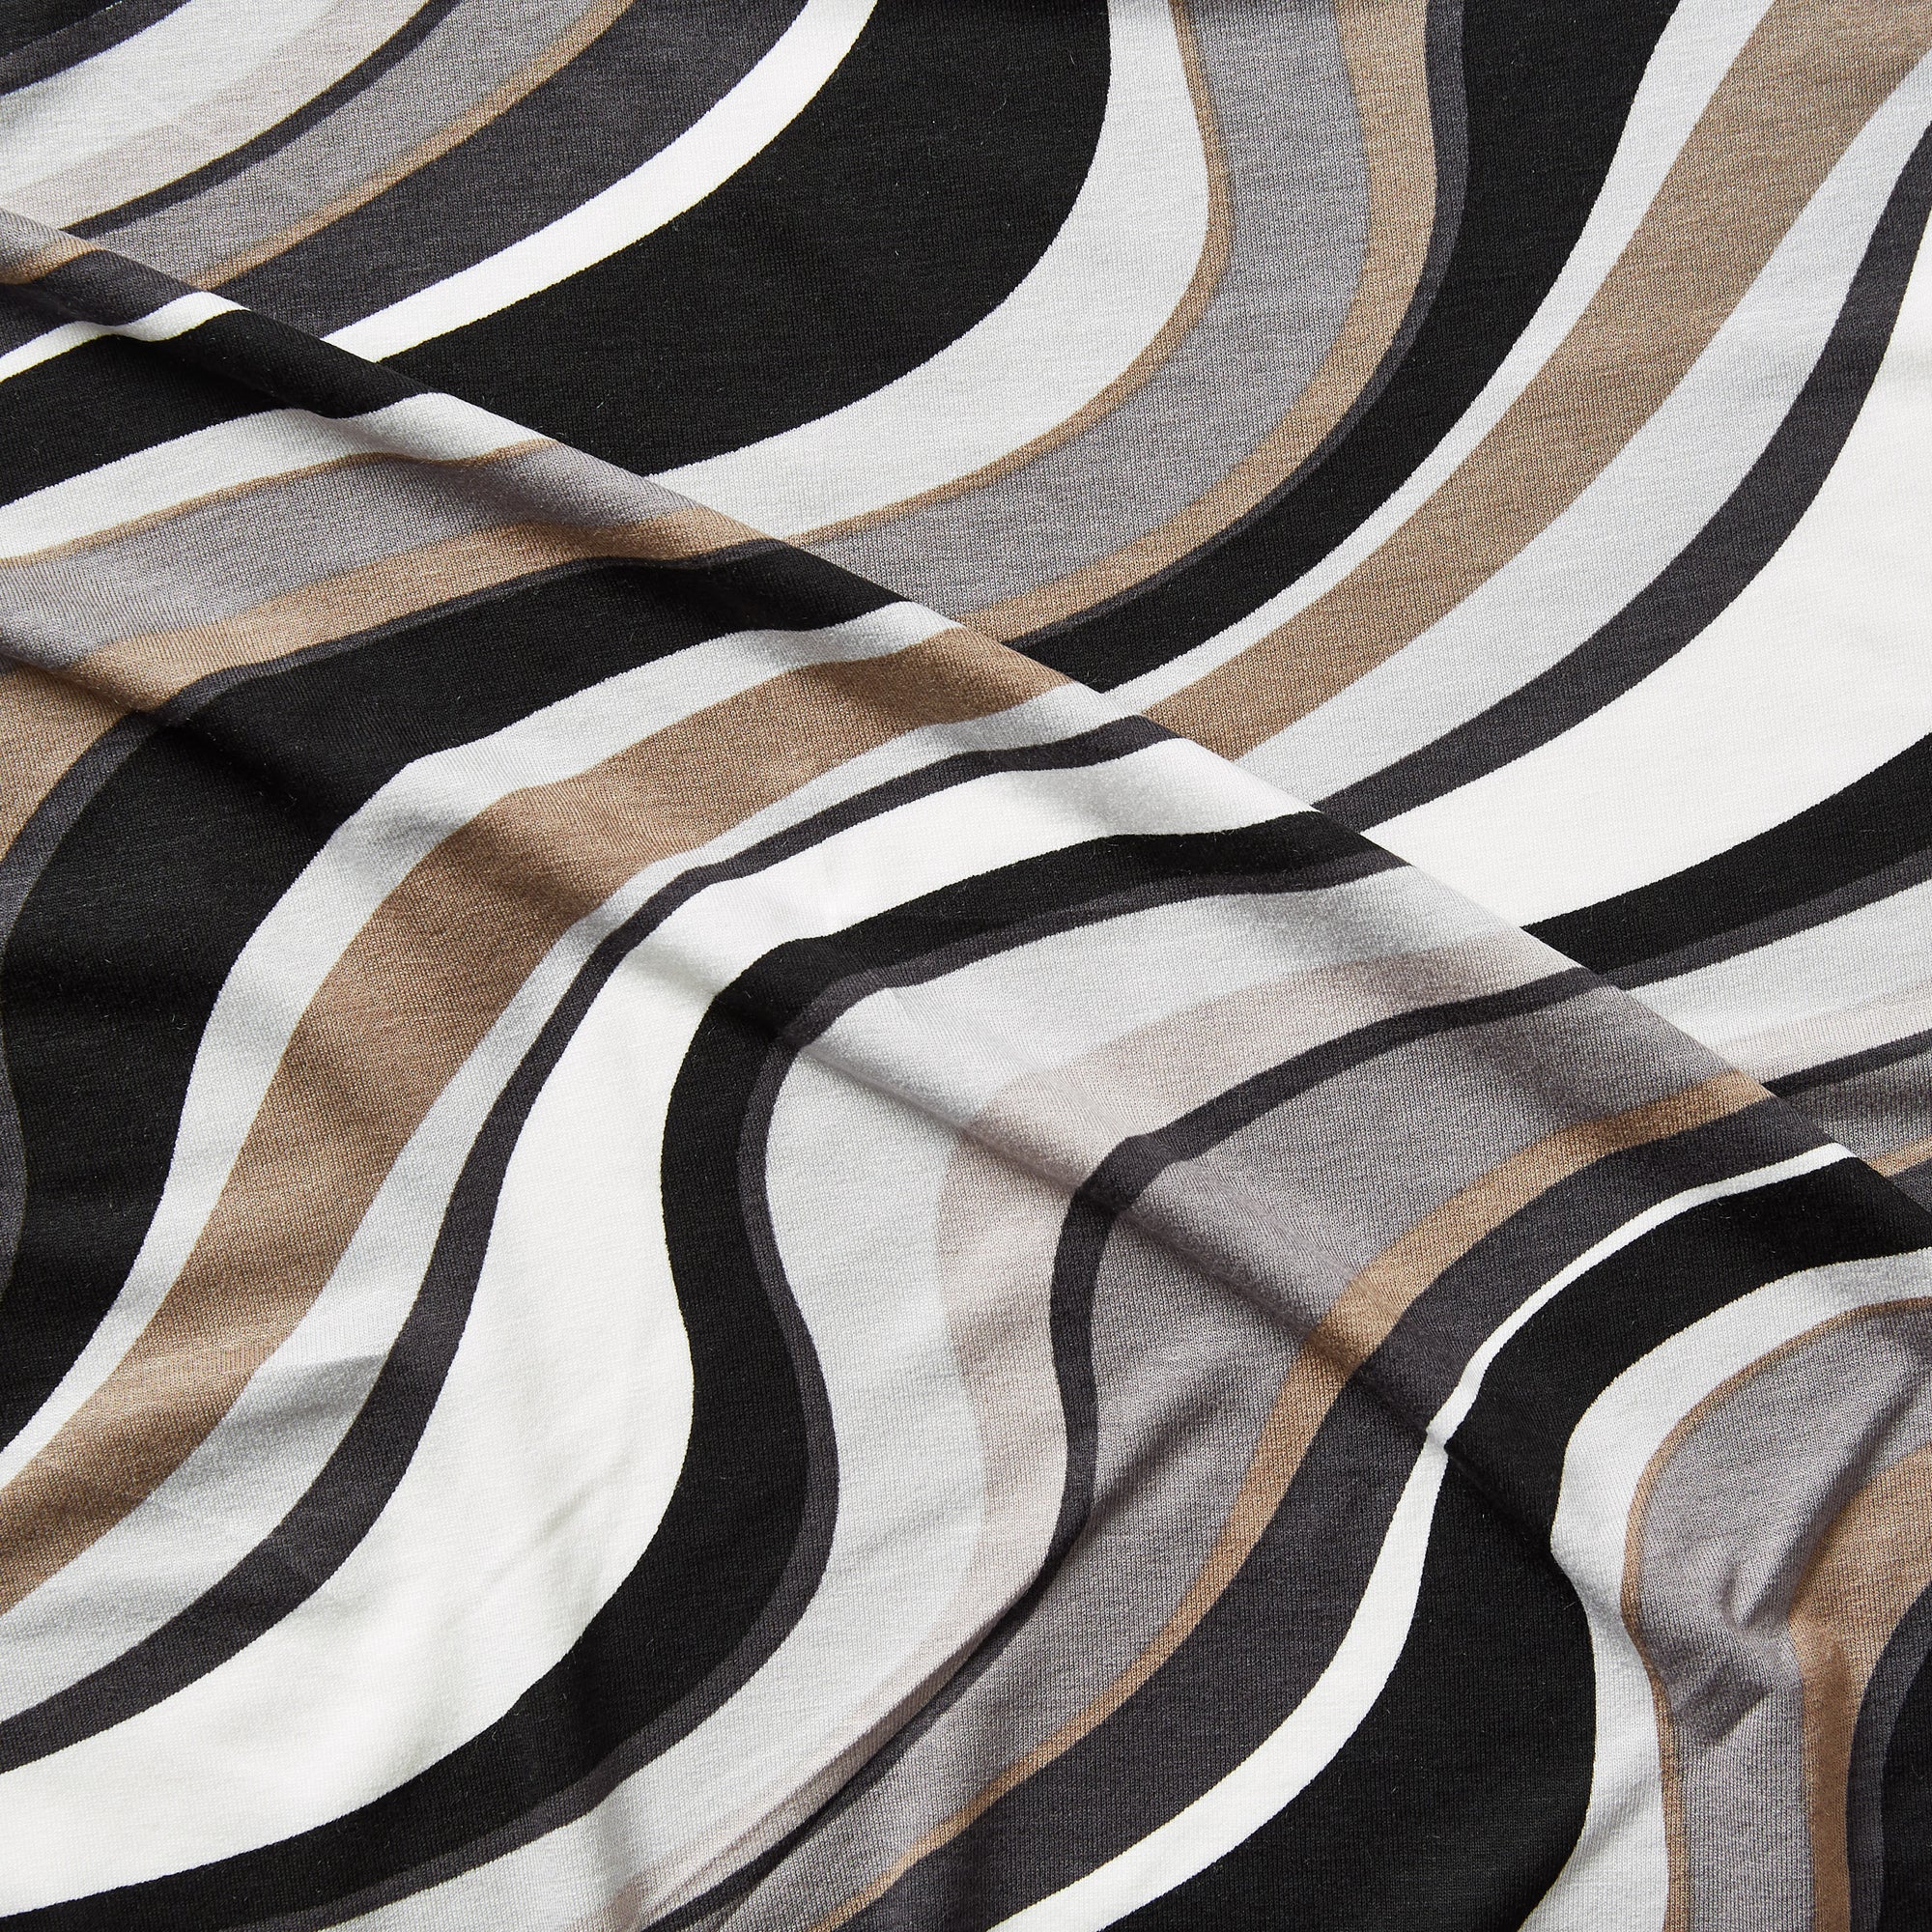 vortex displaying the coffee color version of a stretch soft jersey knit with wavy digital print rayon with spandex for figure hugging